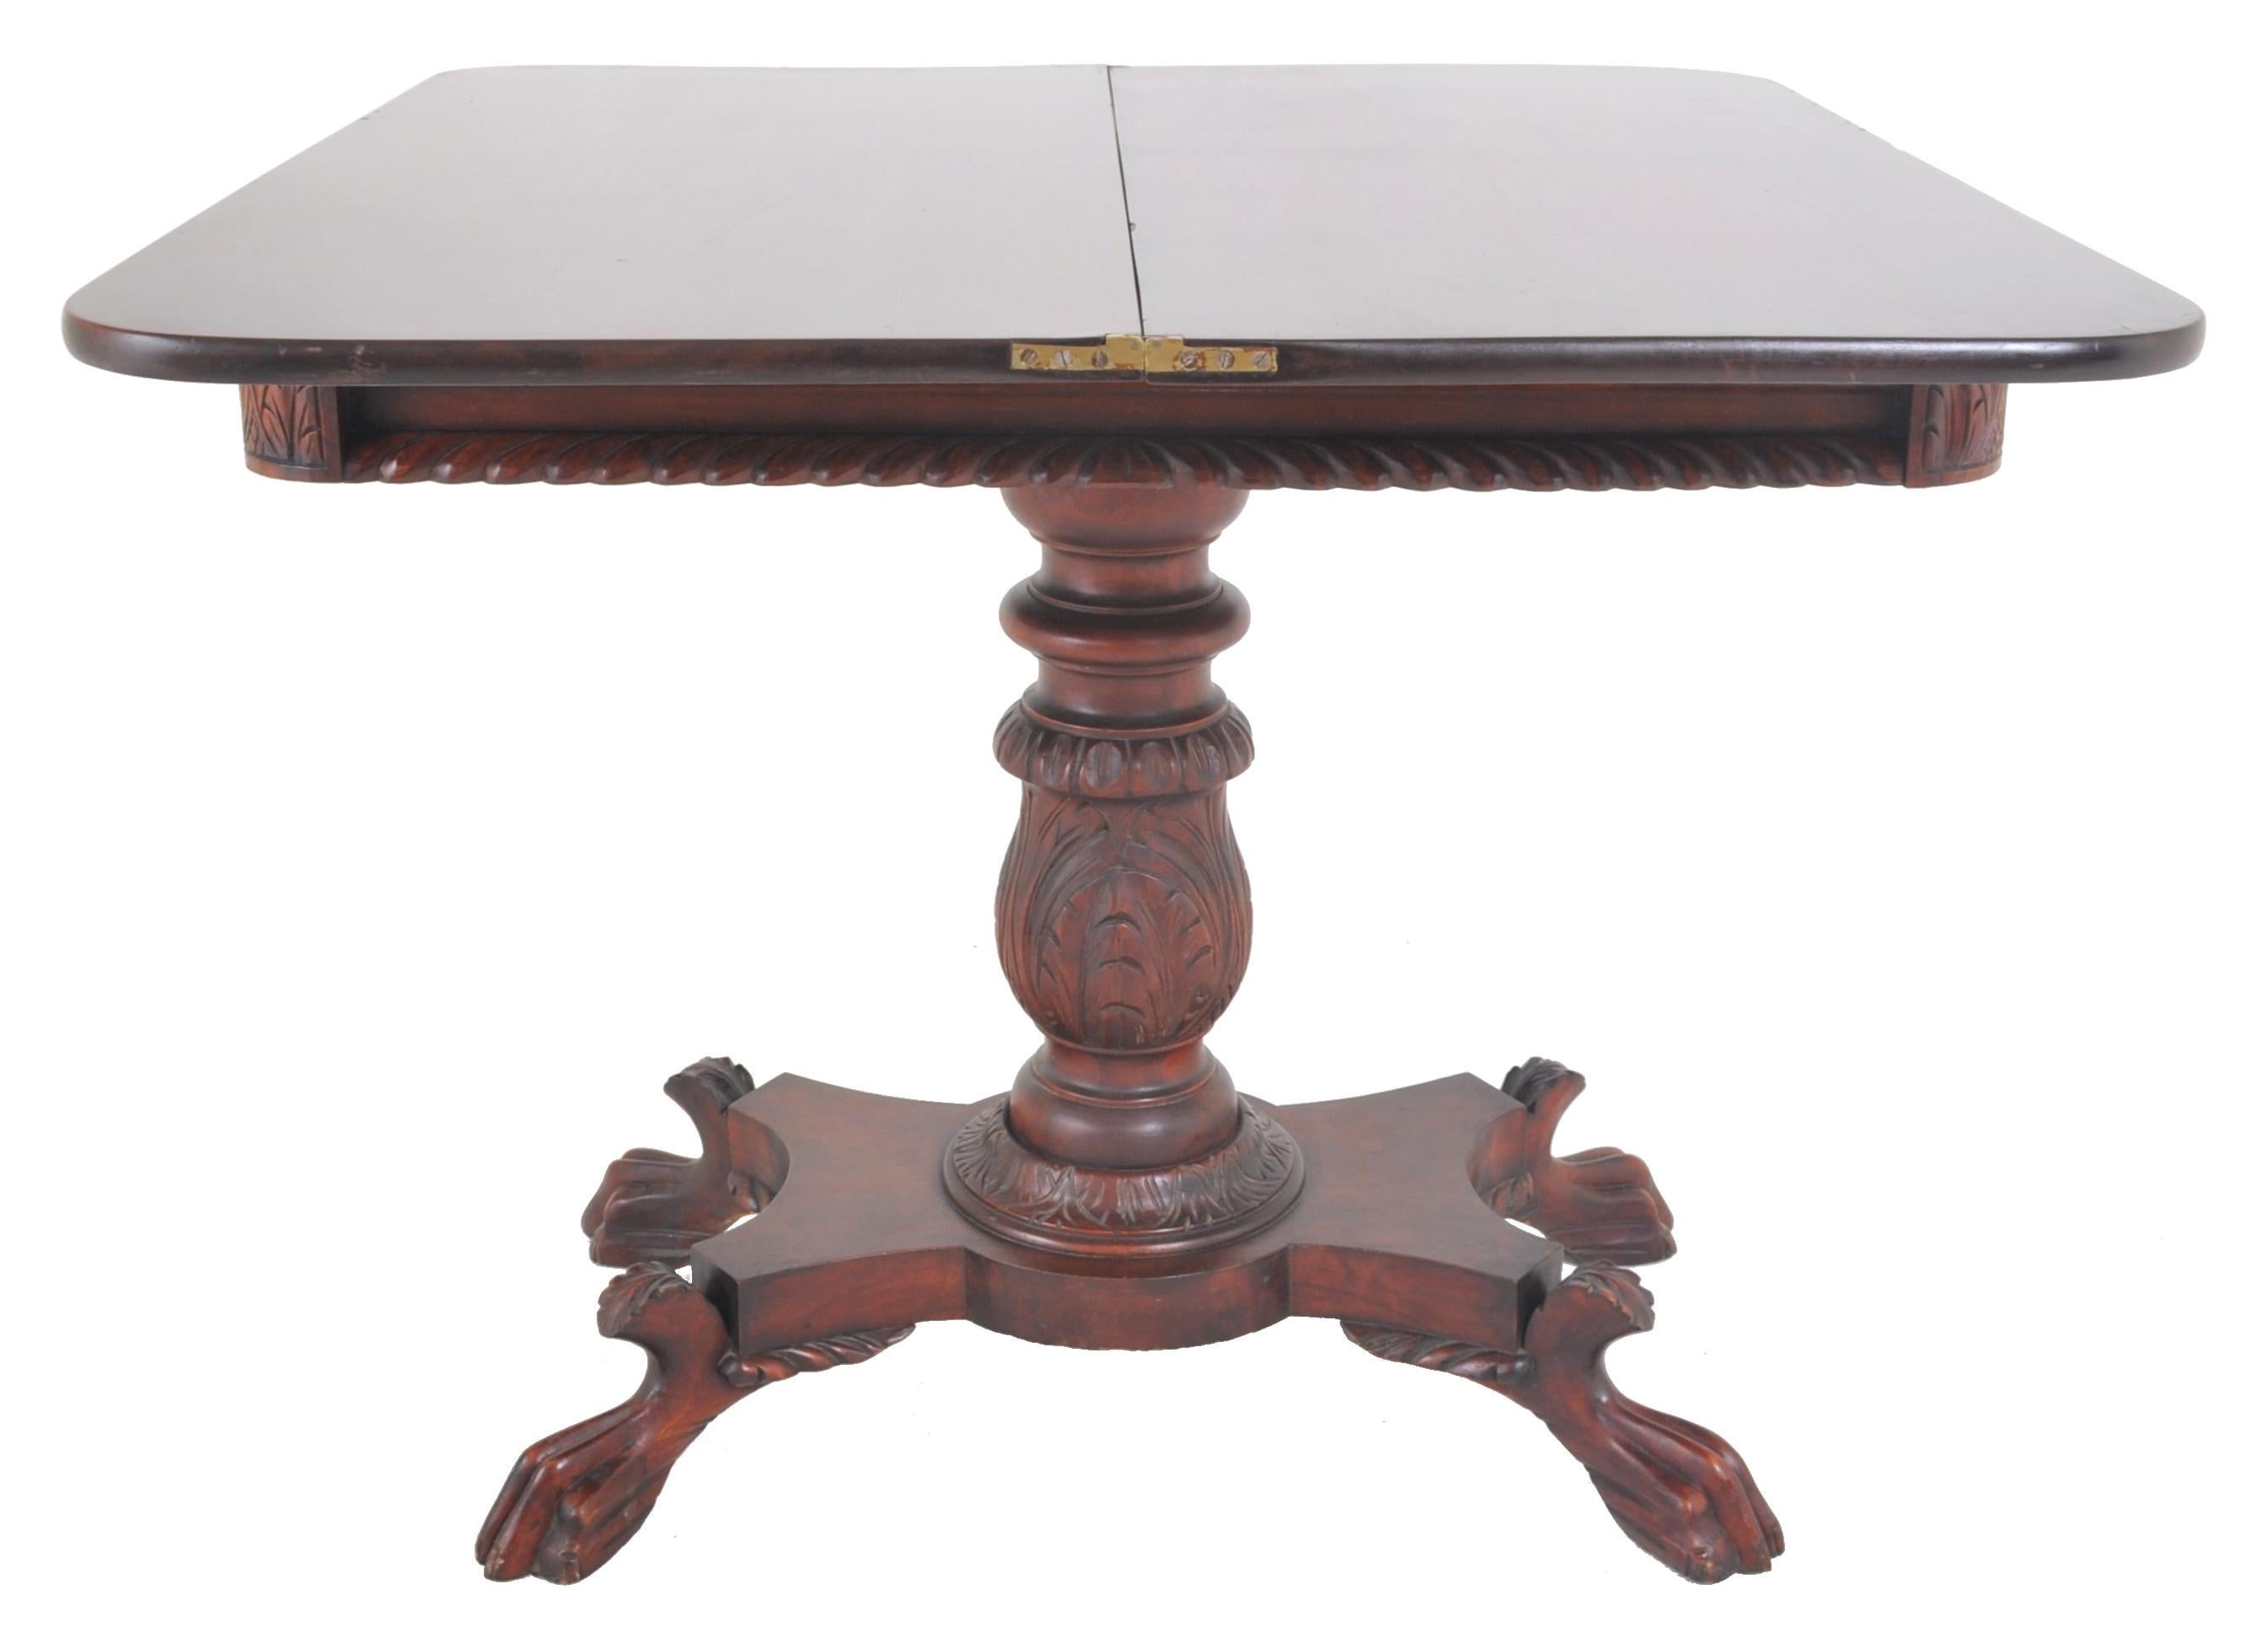 Antique American Late Federal/Empire Mahogany Tea/Games/Card Table, circa 1830 In Good Condition For Sale In Portland, OR